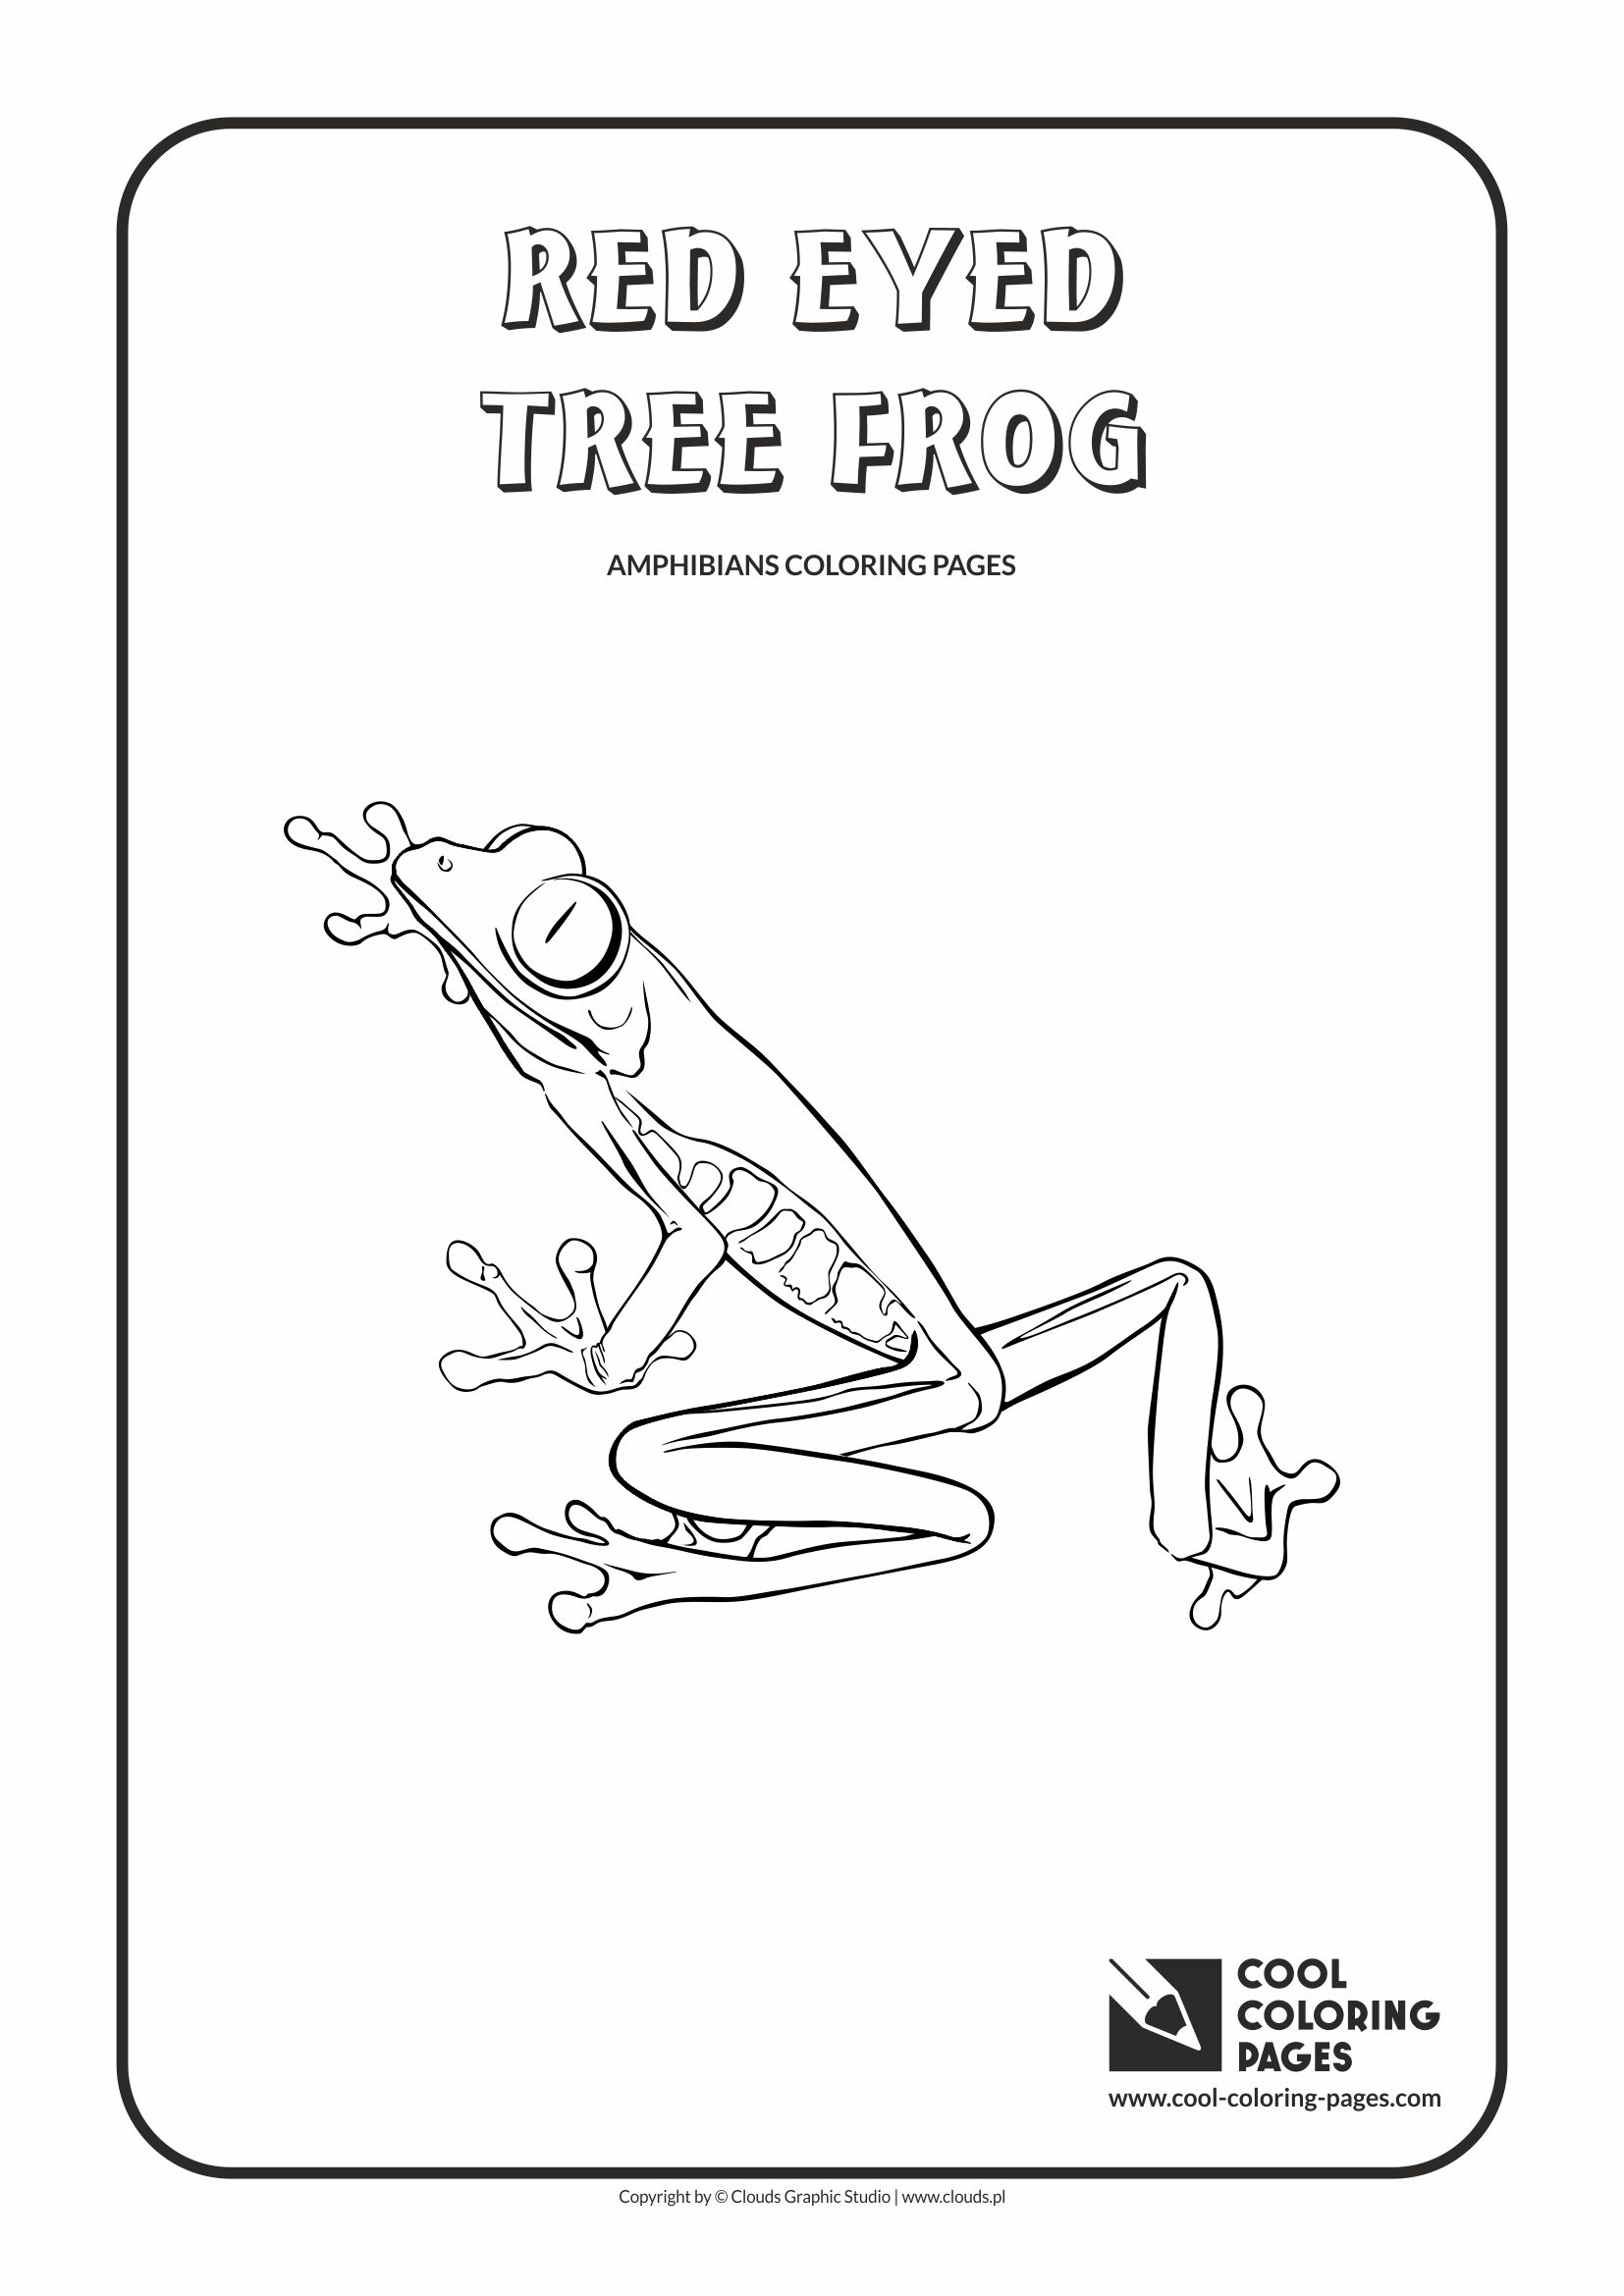 Cool Coloring Pages - Animals / Red eyed tree frog / Coloring page with red eyed tree frog